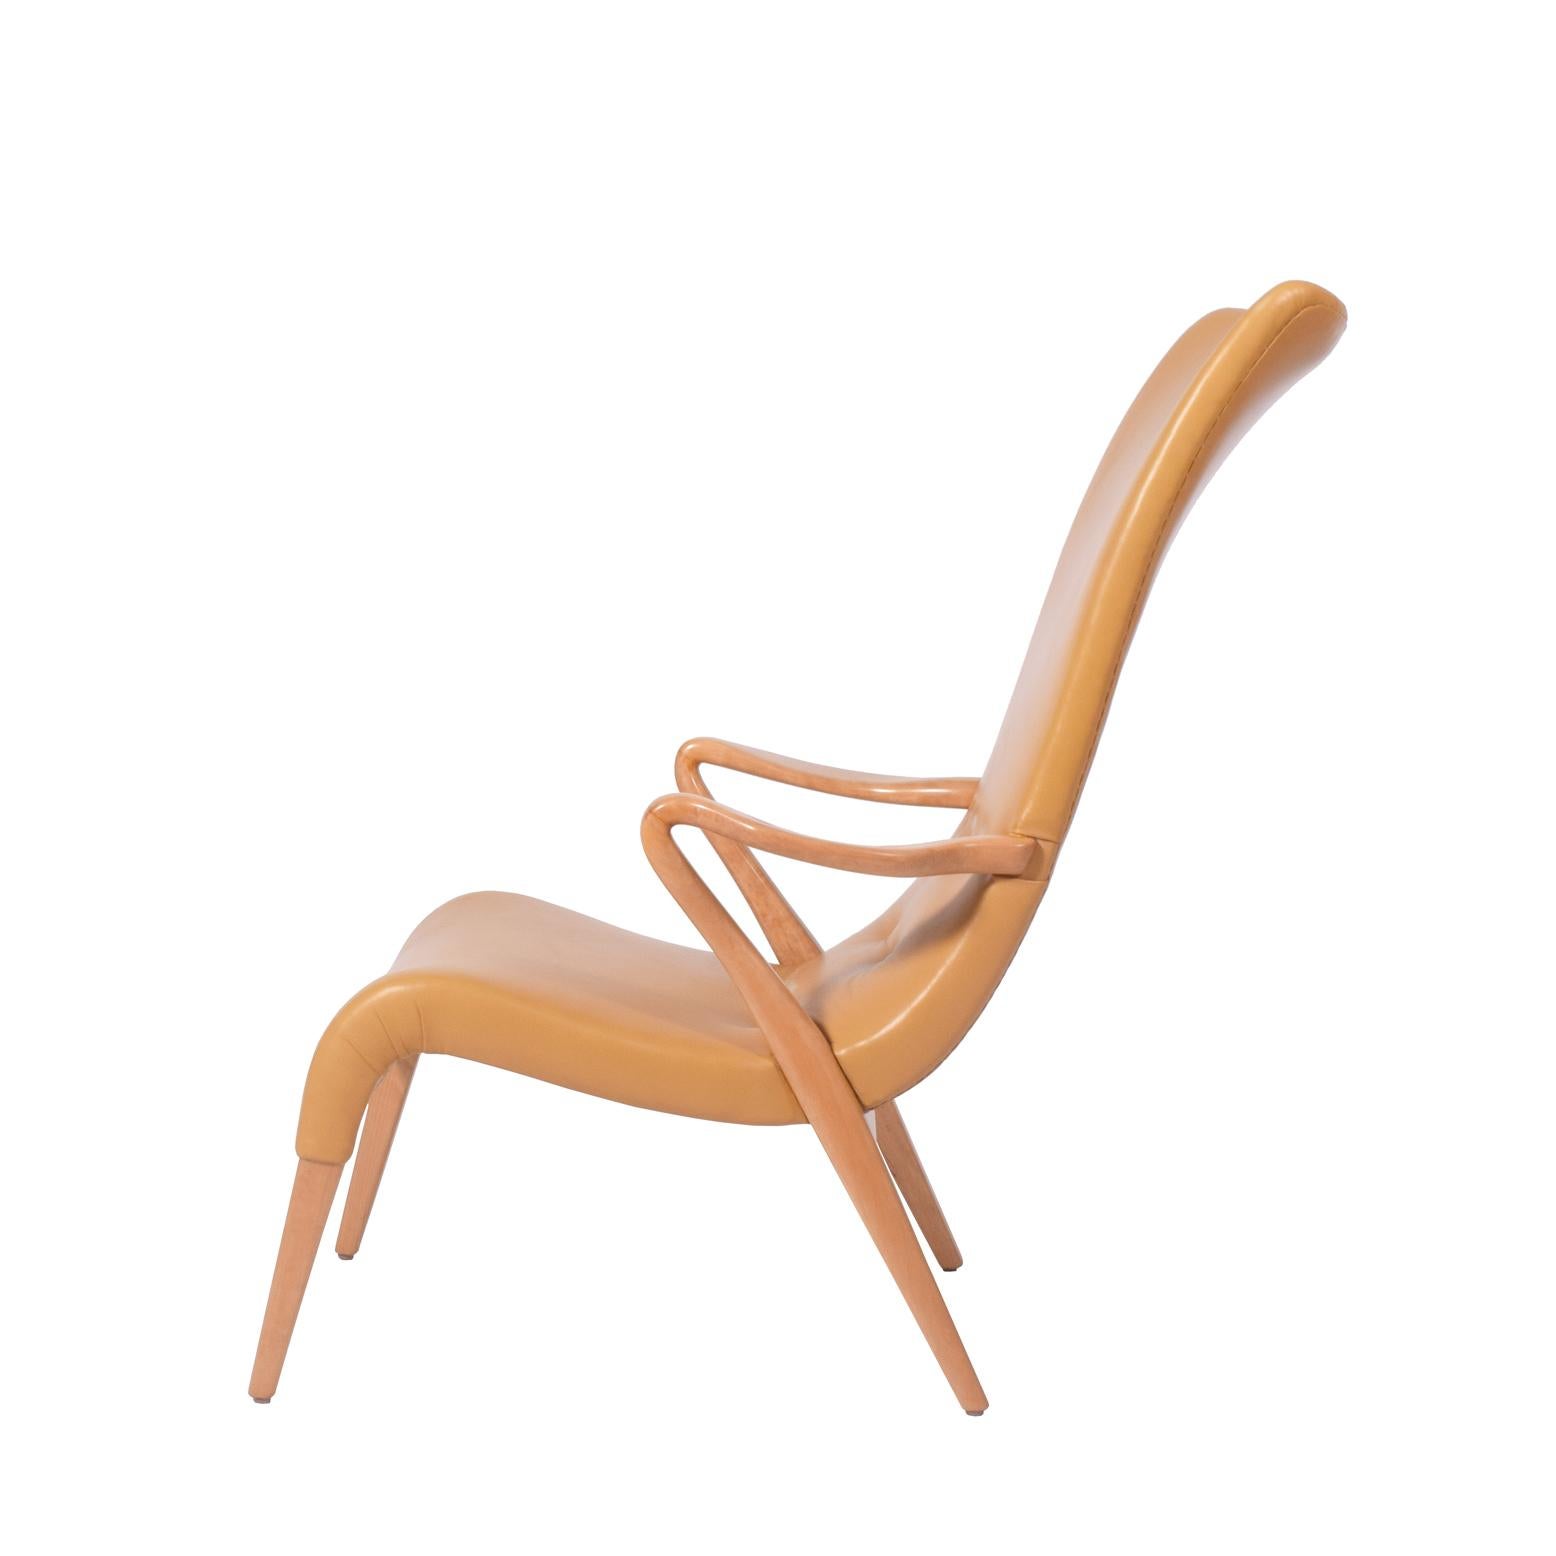 Designed in 1937, this Axel Larsson easy chair is a freeform sculpture with a solid birch frame. Model #1207. Originally designed for a hotel in Stockholm. Includes stamp on the inside frame SMF. This particular model was exhibited at the Swedish